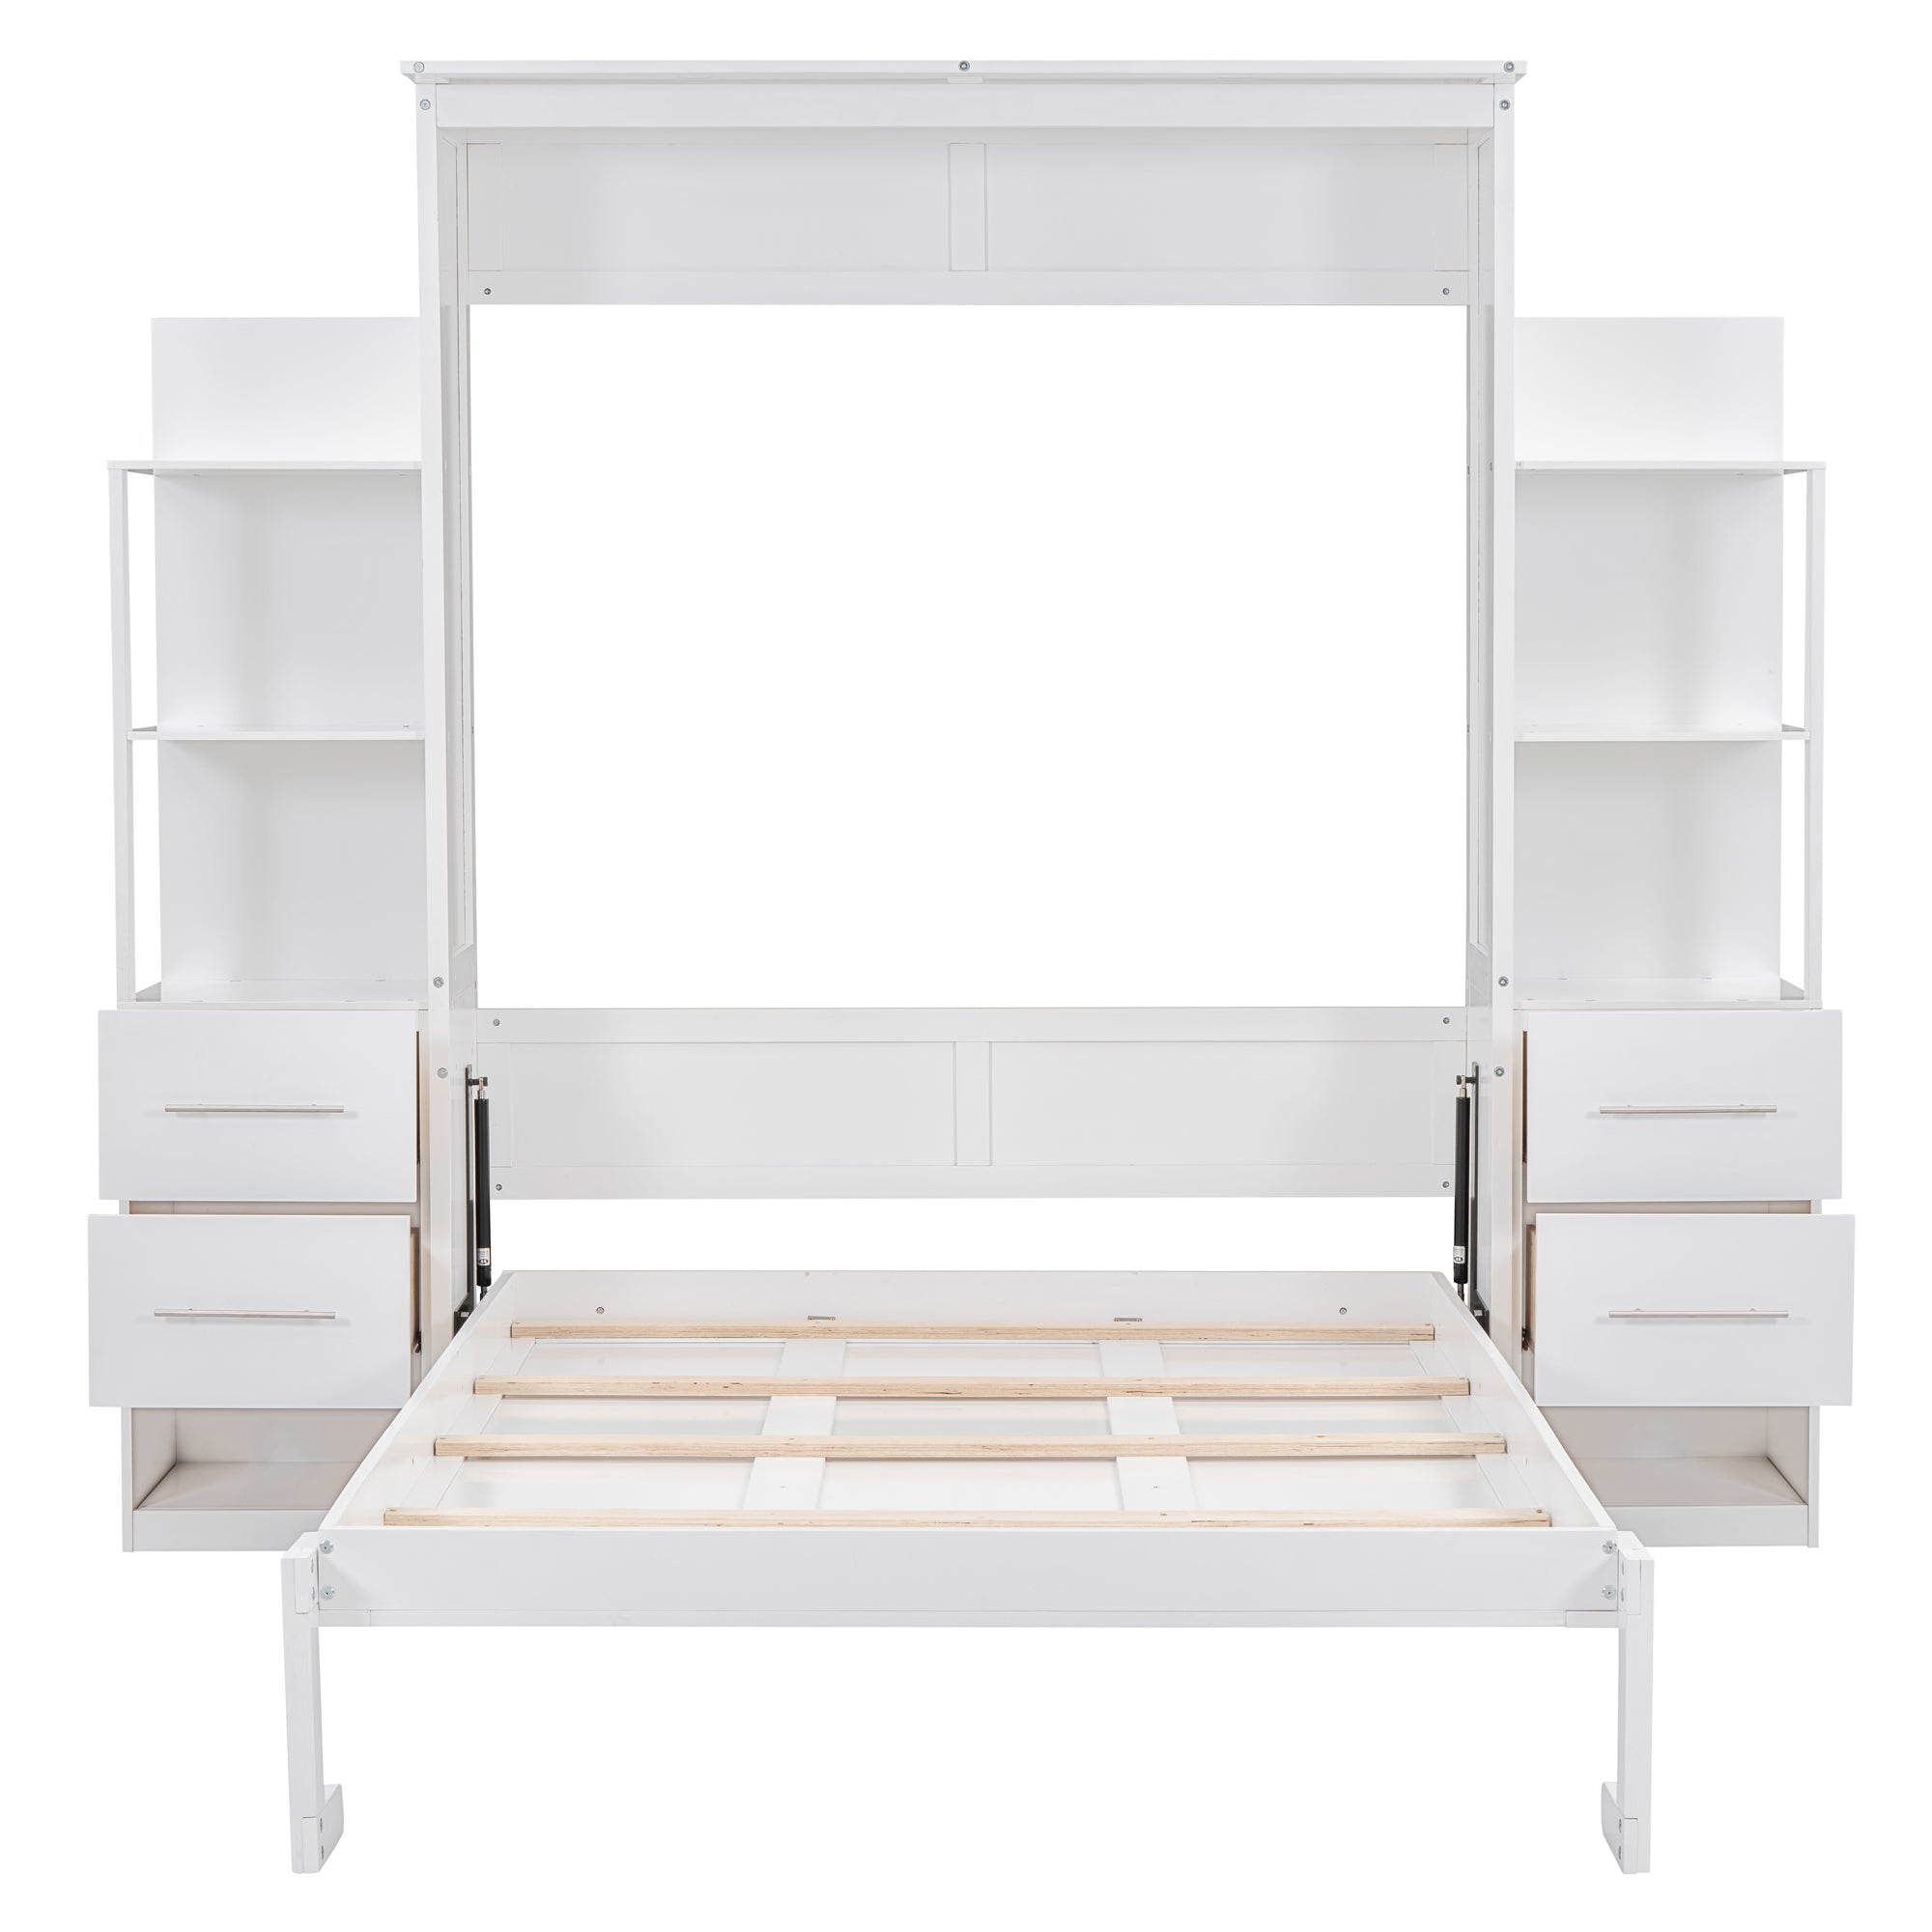 Bellemave® Murphy Bed Wall Bed with Shelves, Drawers and LED Lights Bellemave®